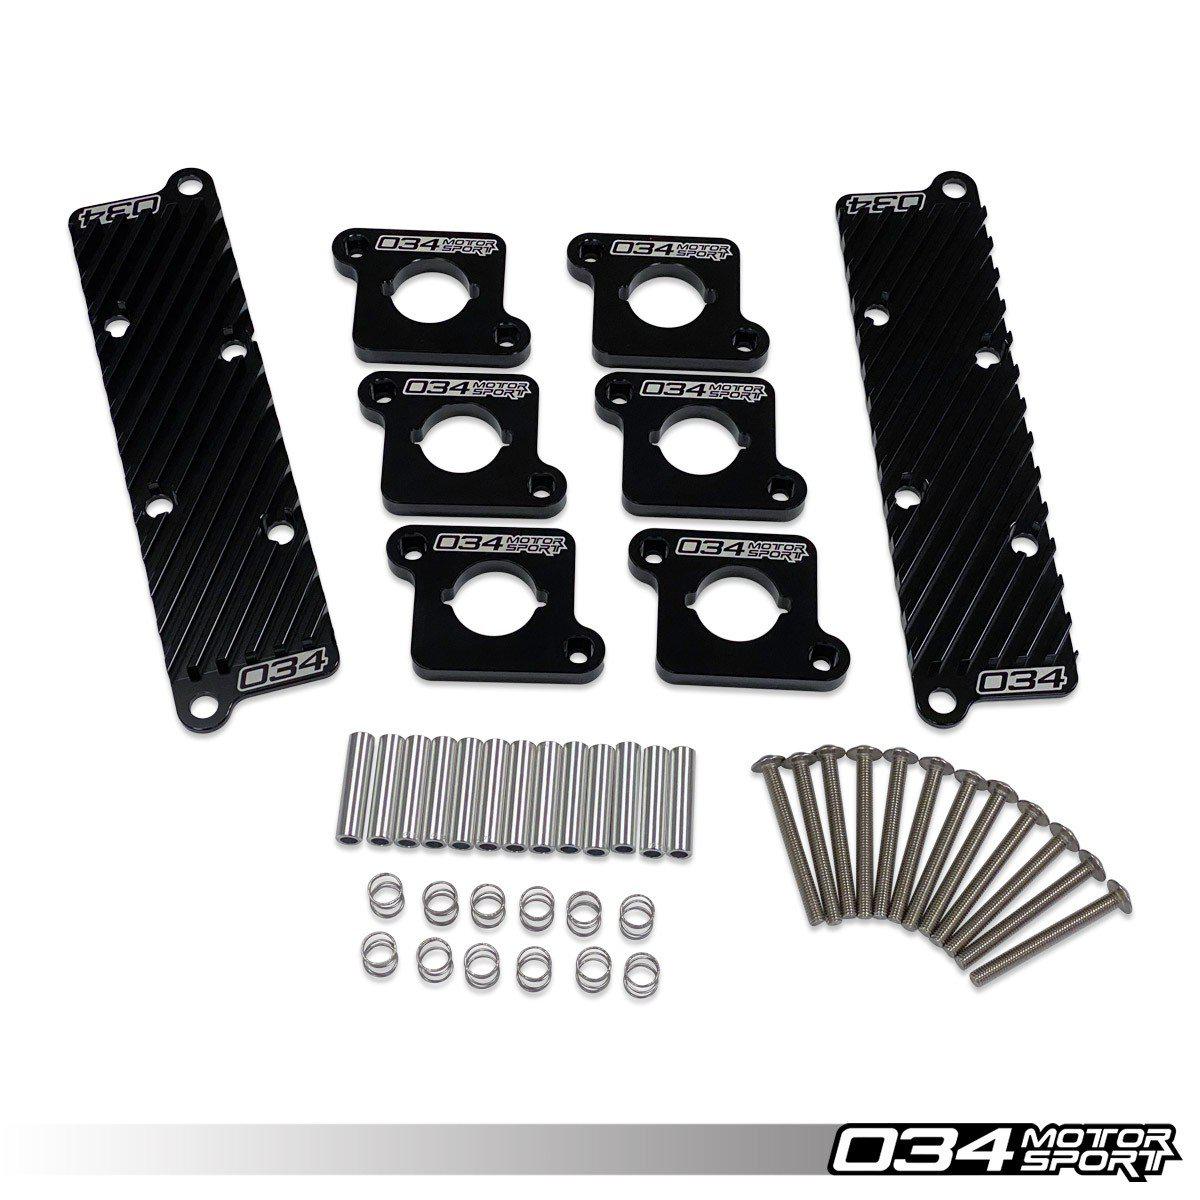 Billet Aluminum Coil Pack Hold Down Bracket Kit For Audi B5 S4/RS4 & C5 A6/Allroad 2.7T-A Little Tuning Co